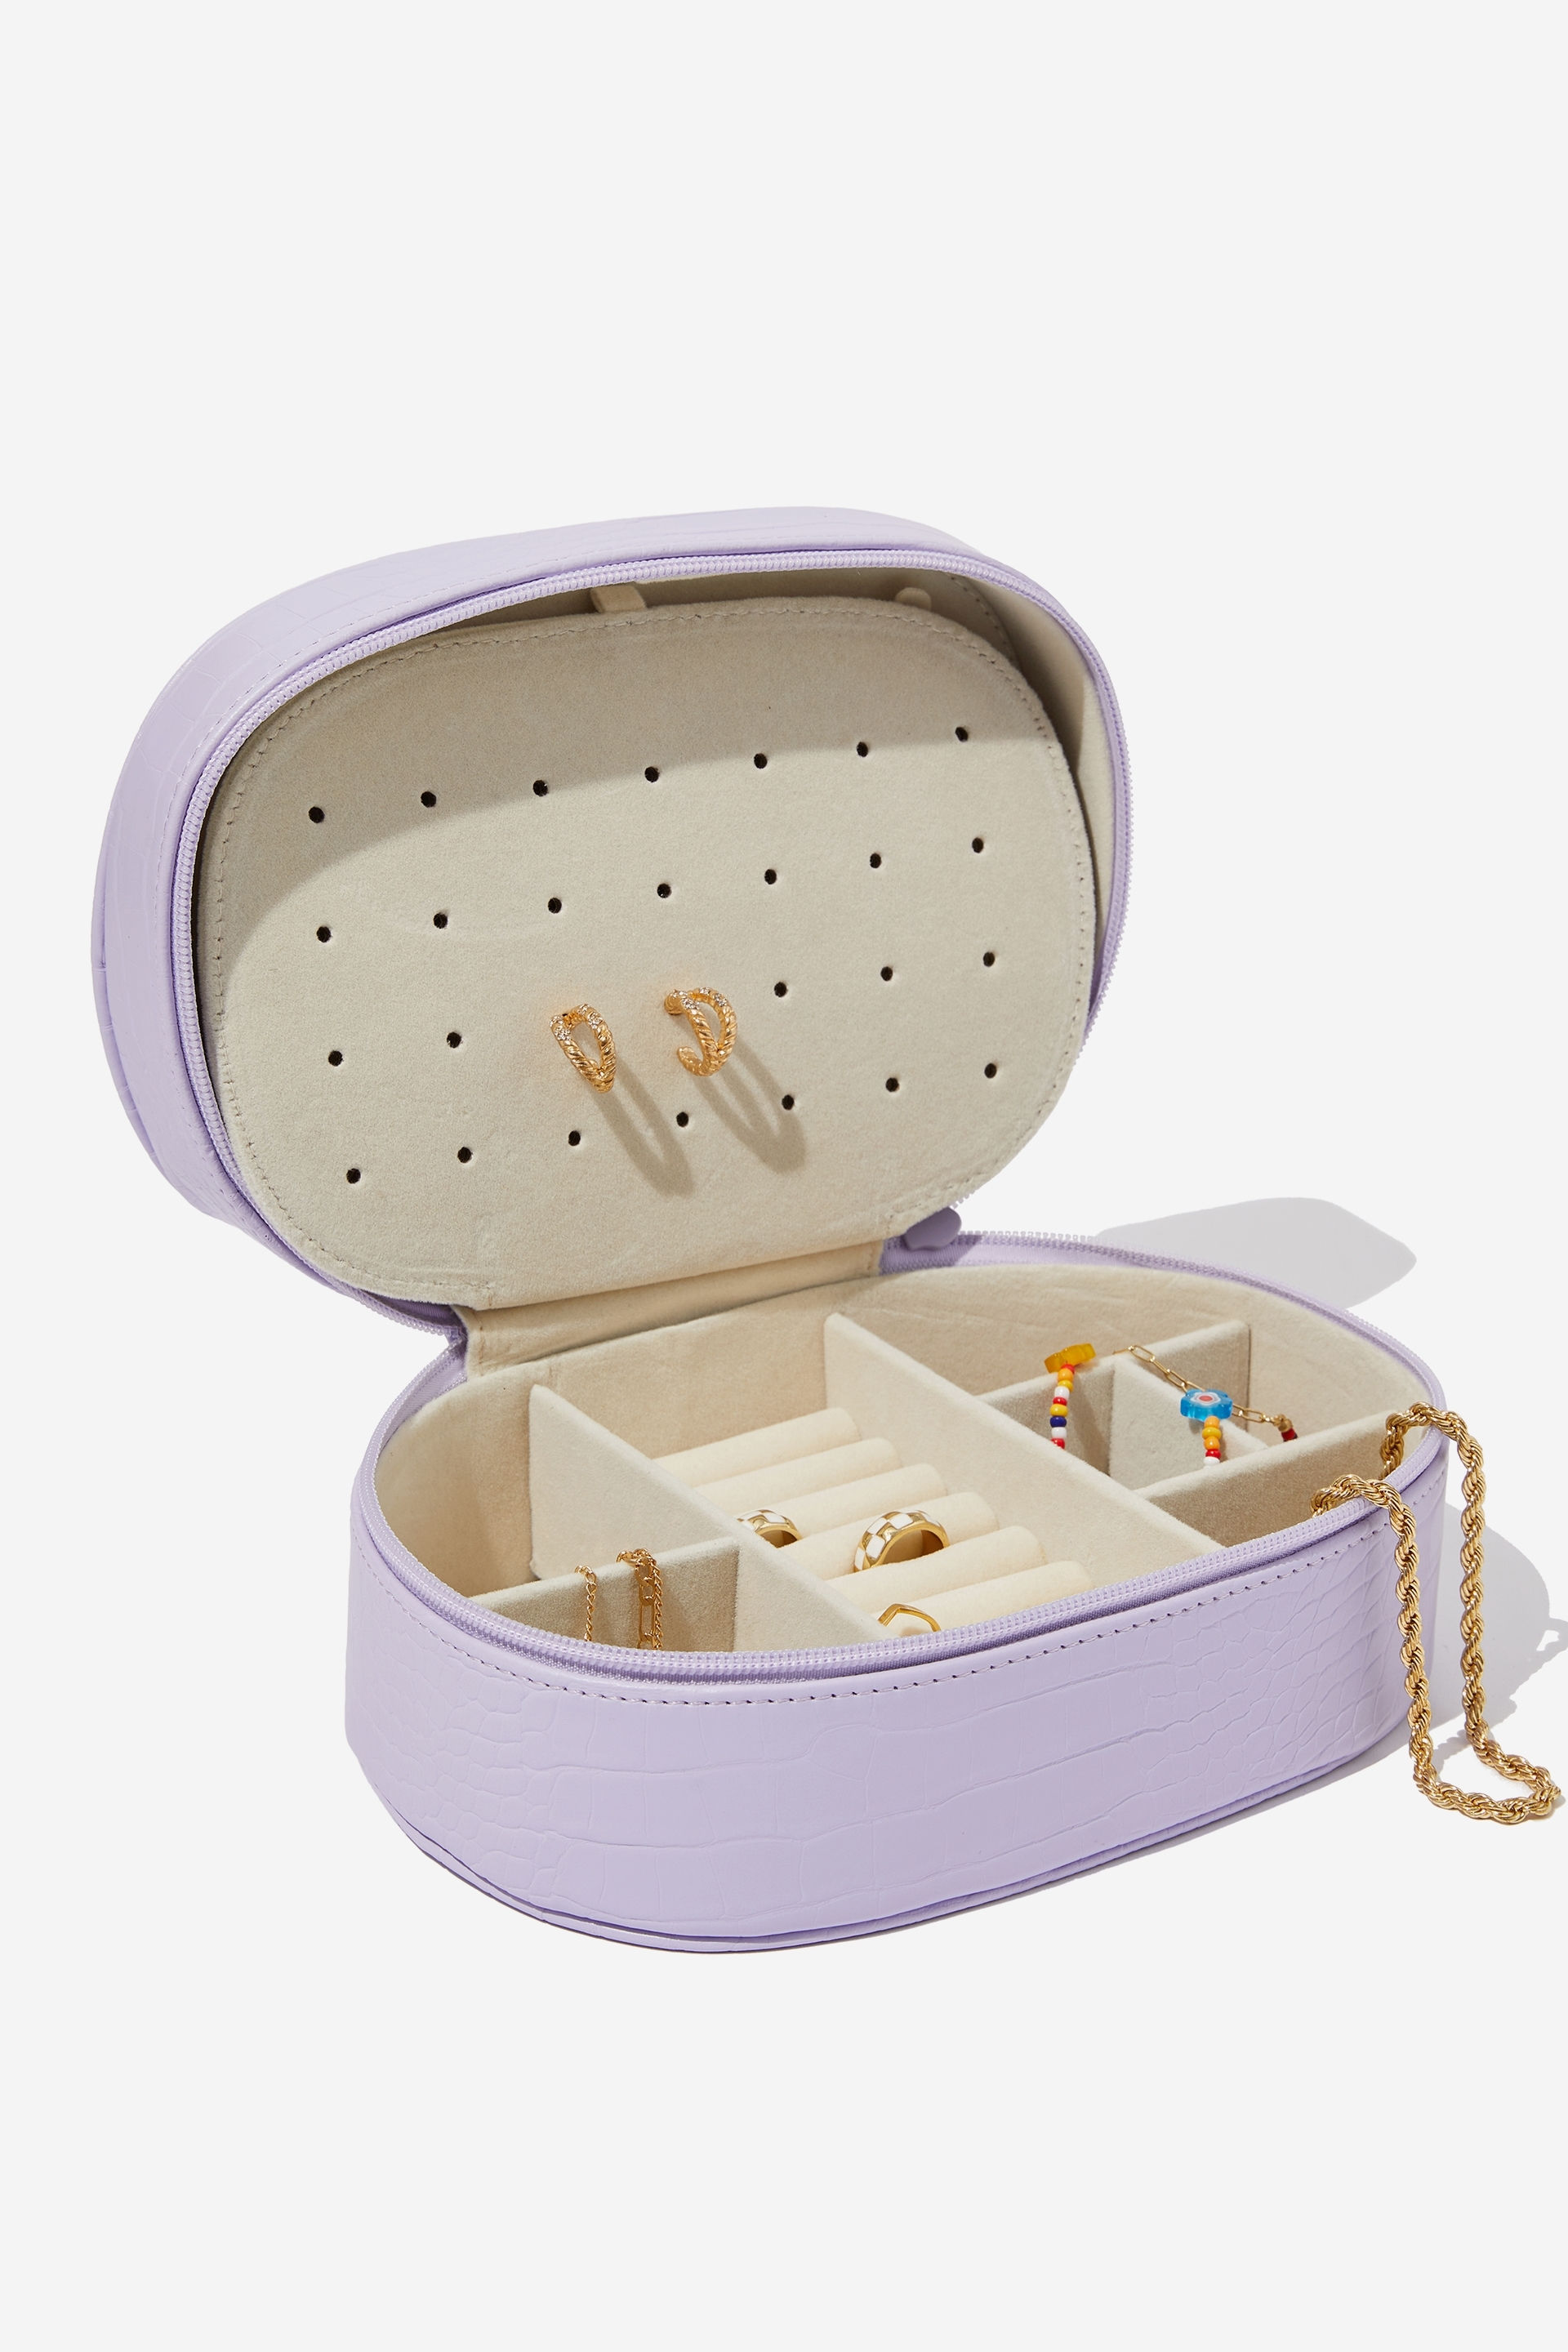 Typo - Off The Grid Jewellery Case Large - Soft lilac textured